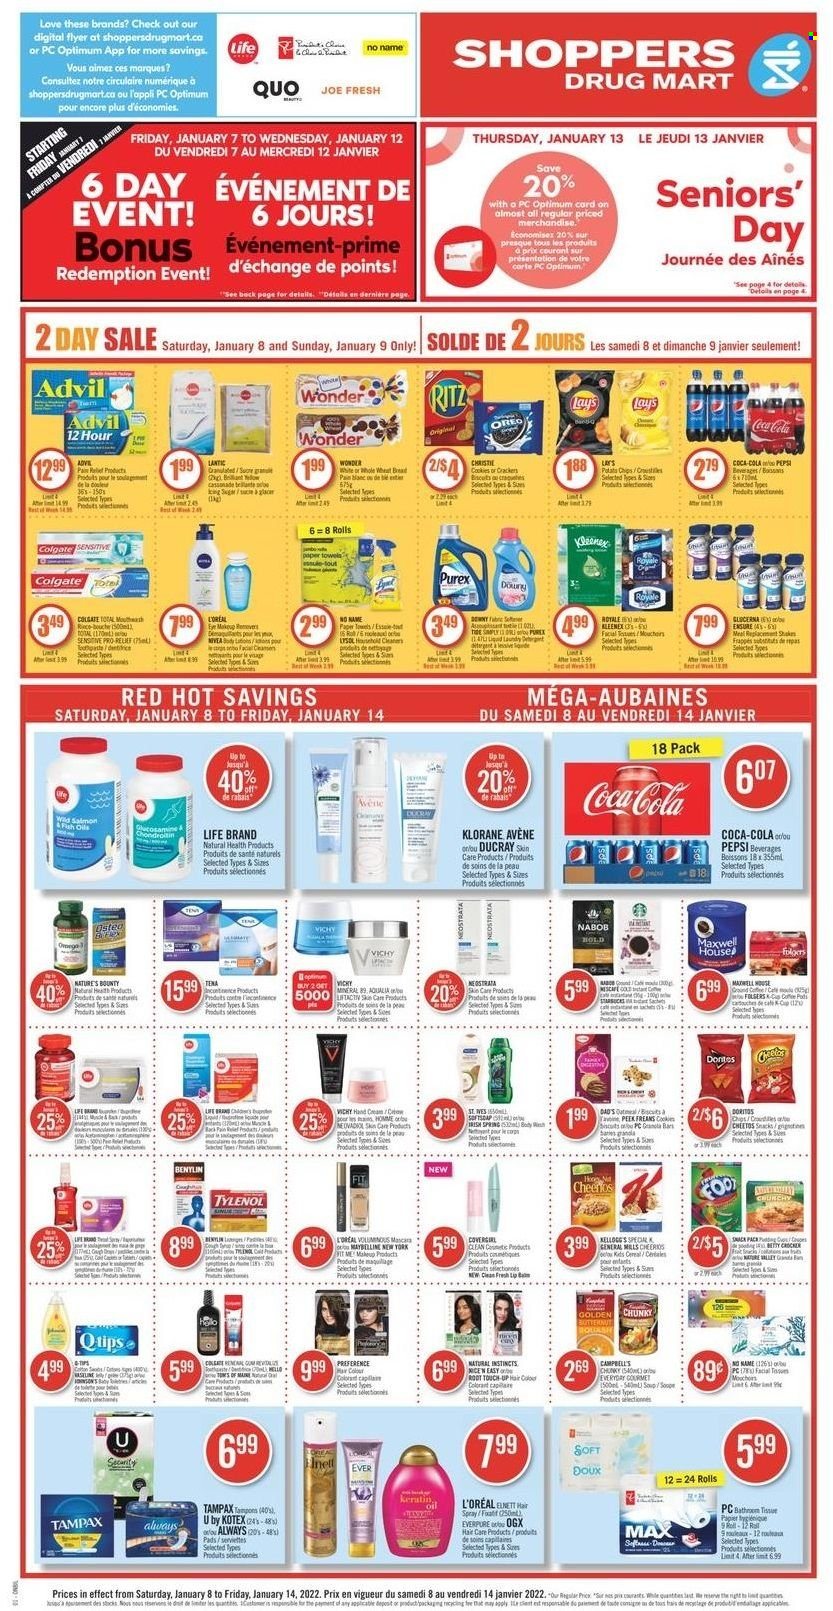 thumbnail - Shoppers Drug Mart Flyer - January 08, 2022 - January 14, 2022 - Sales products - cookies, Bounty, crackers, RITZ, Cheetos, Lay’s, salmon, Dole, oil, Coca-Cola, Pepsi, Maxwell House, Folgers, Kleenex, kitchen towels, paper towels, Lysol, Purex, Vichy, Kotex, tampons, L’Oréal, OGX, keratin, Klorane, makeup, mascara, Tylenol, Advil Rapid, Oreo, Colgate, Maybelline, Tampax, chips. Page 1.